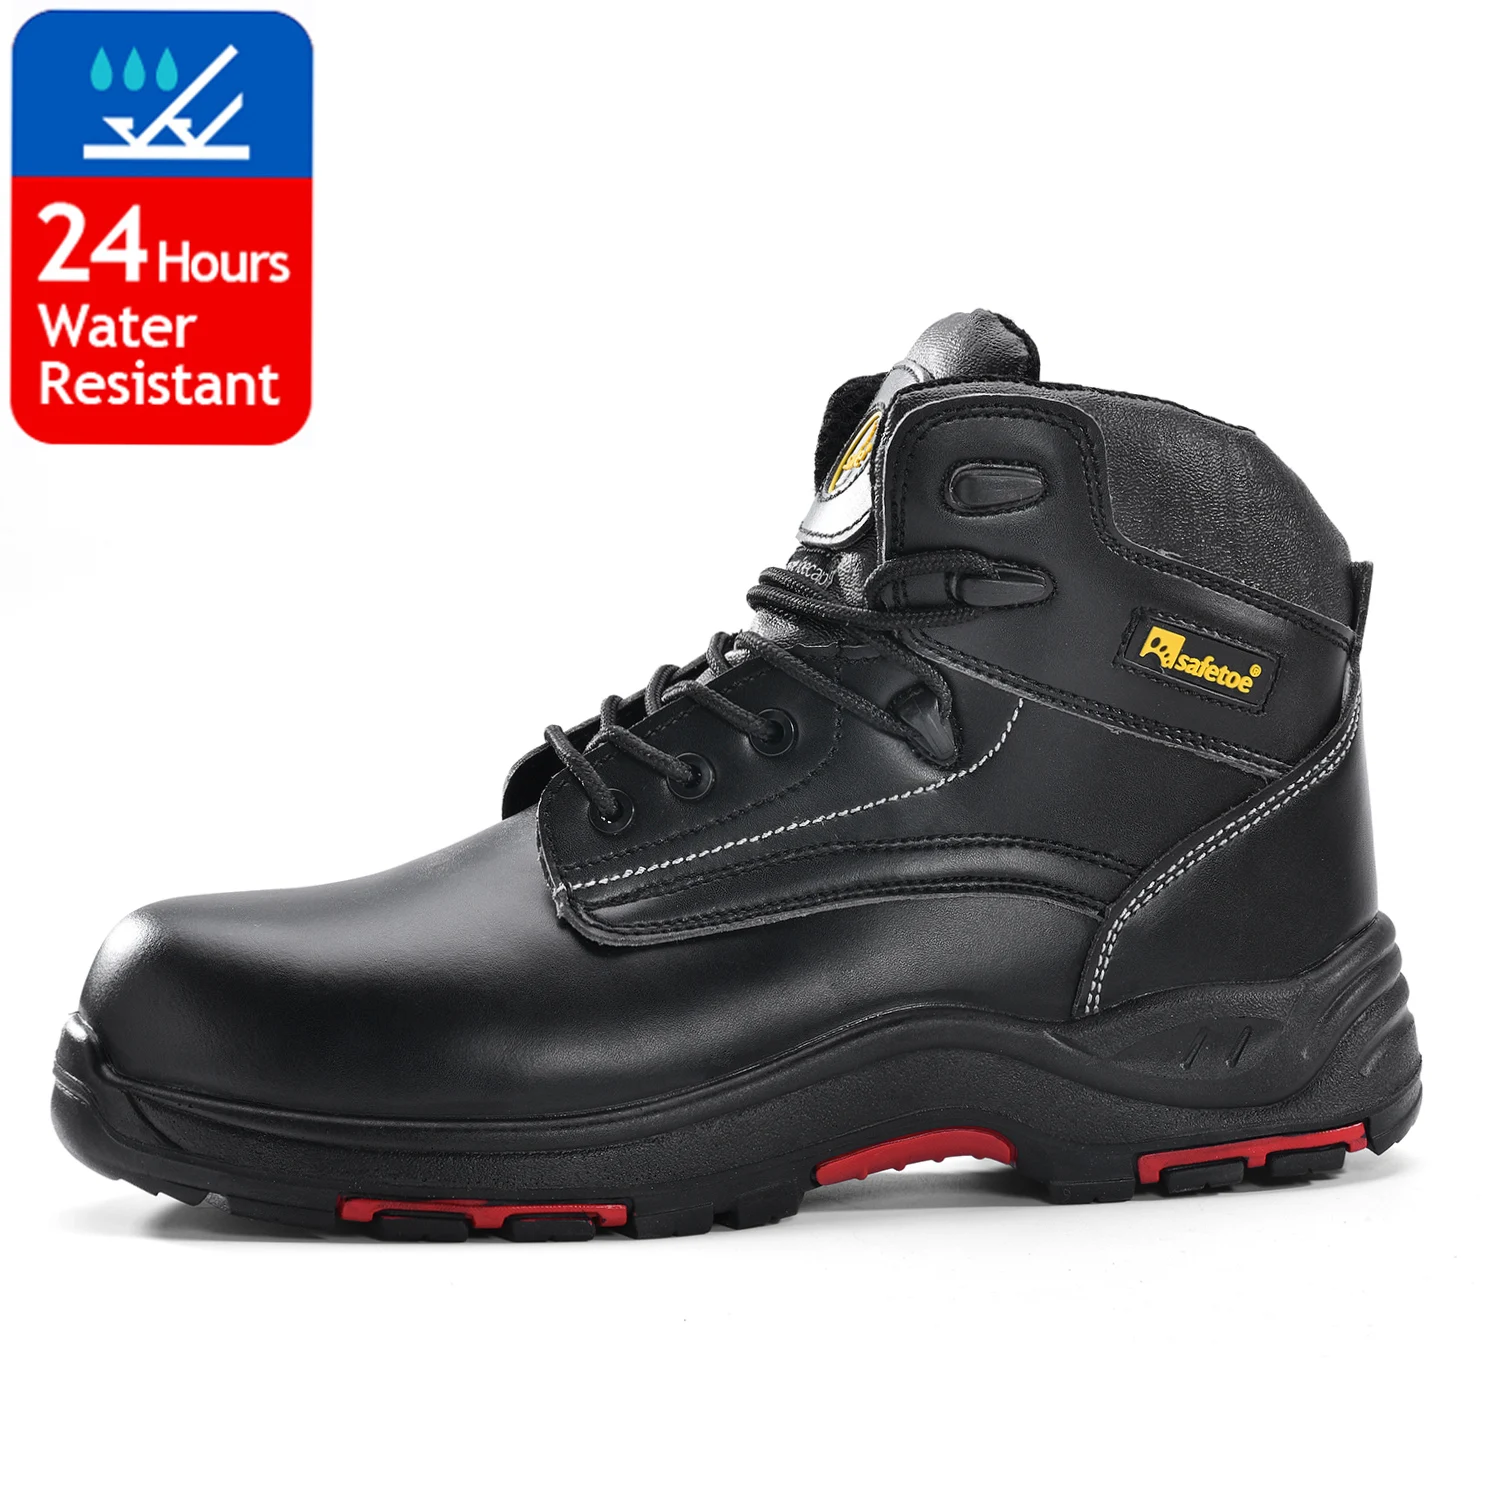 Safetoe Safety Boots Work Shoes Water Resistant Composite Toe Insulated ASTM US 